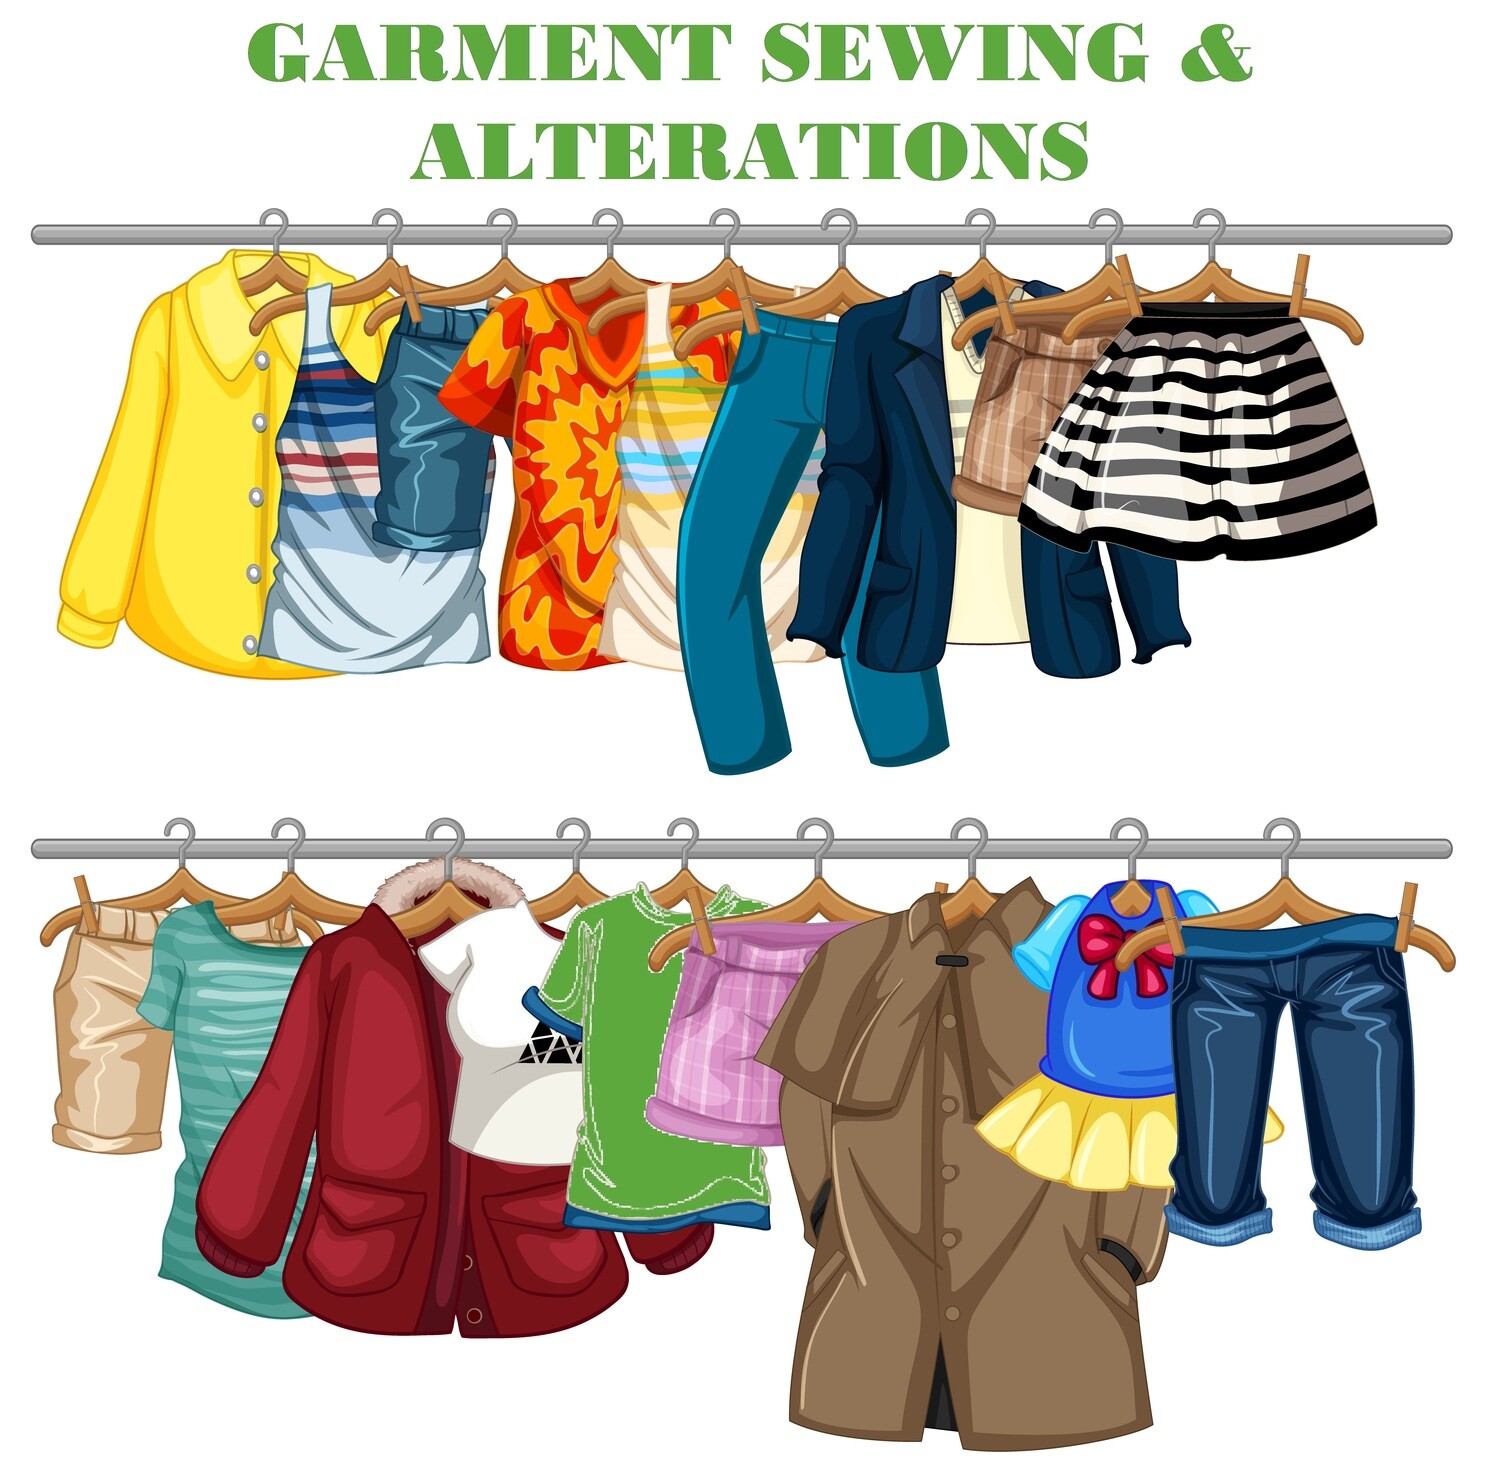 GARMENT SEWING & ALTERATIONS
$50.00 + HST (each)
Thursday October 19th, 10:30 am - 4:30 pm